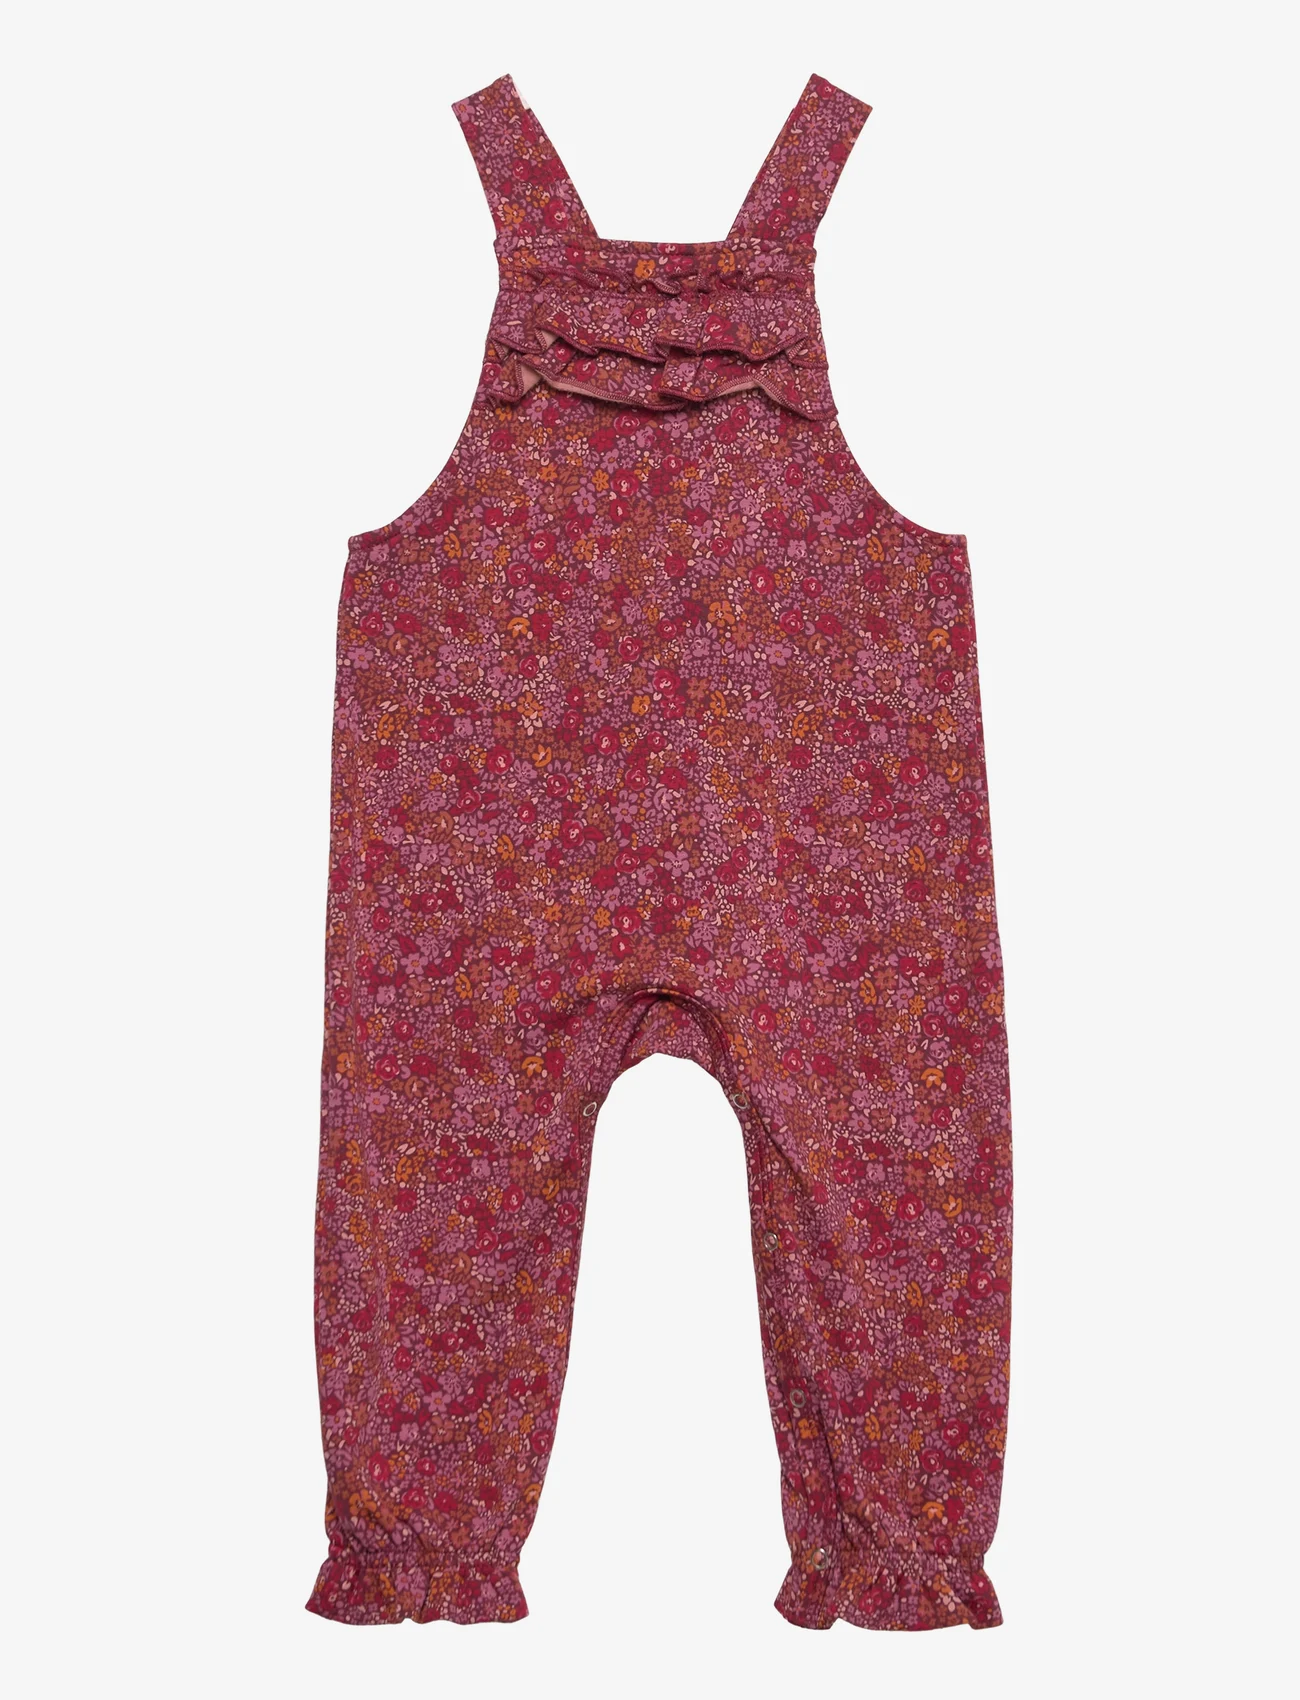 Müsli by Green Cotton - Petit blossom spencer baby - summer savings - fig/boysenberry/berry red - 0